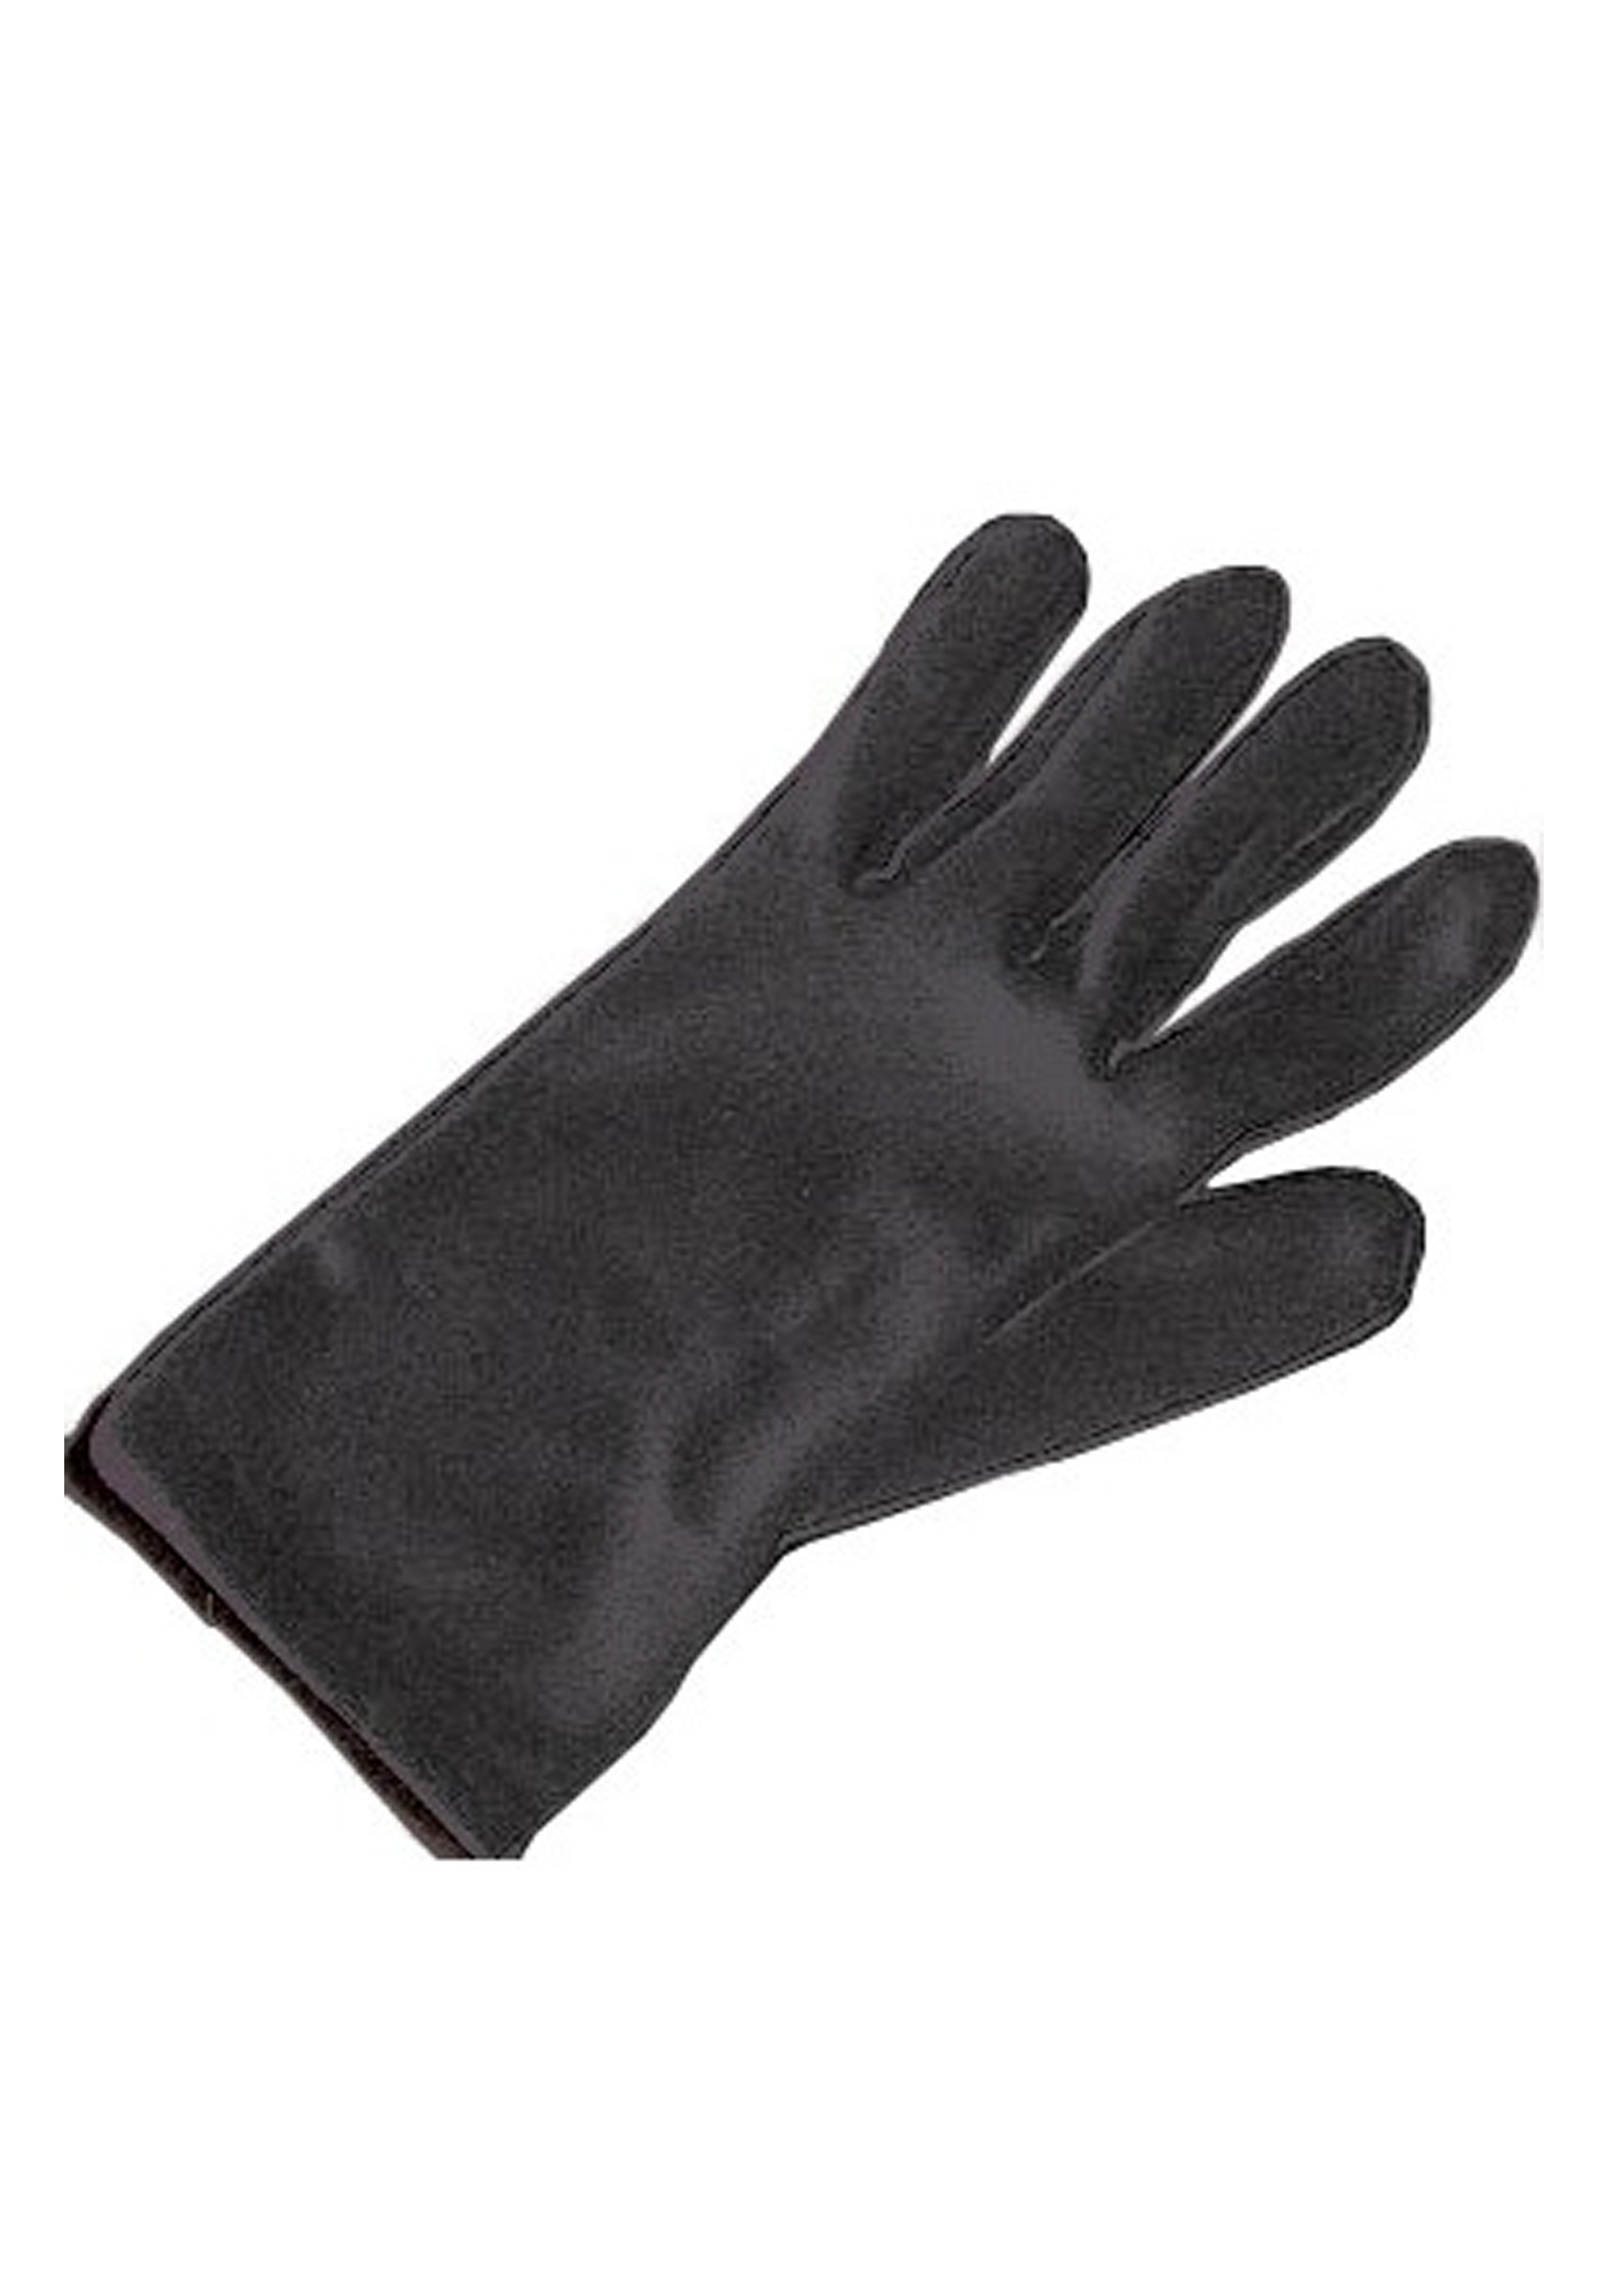 Black Costume Gloves For Adults